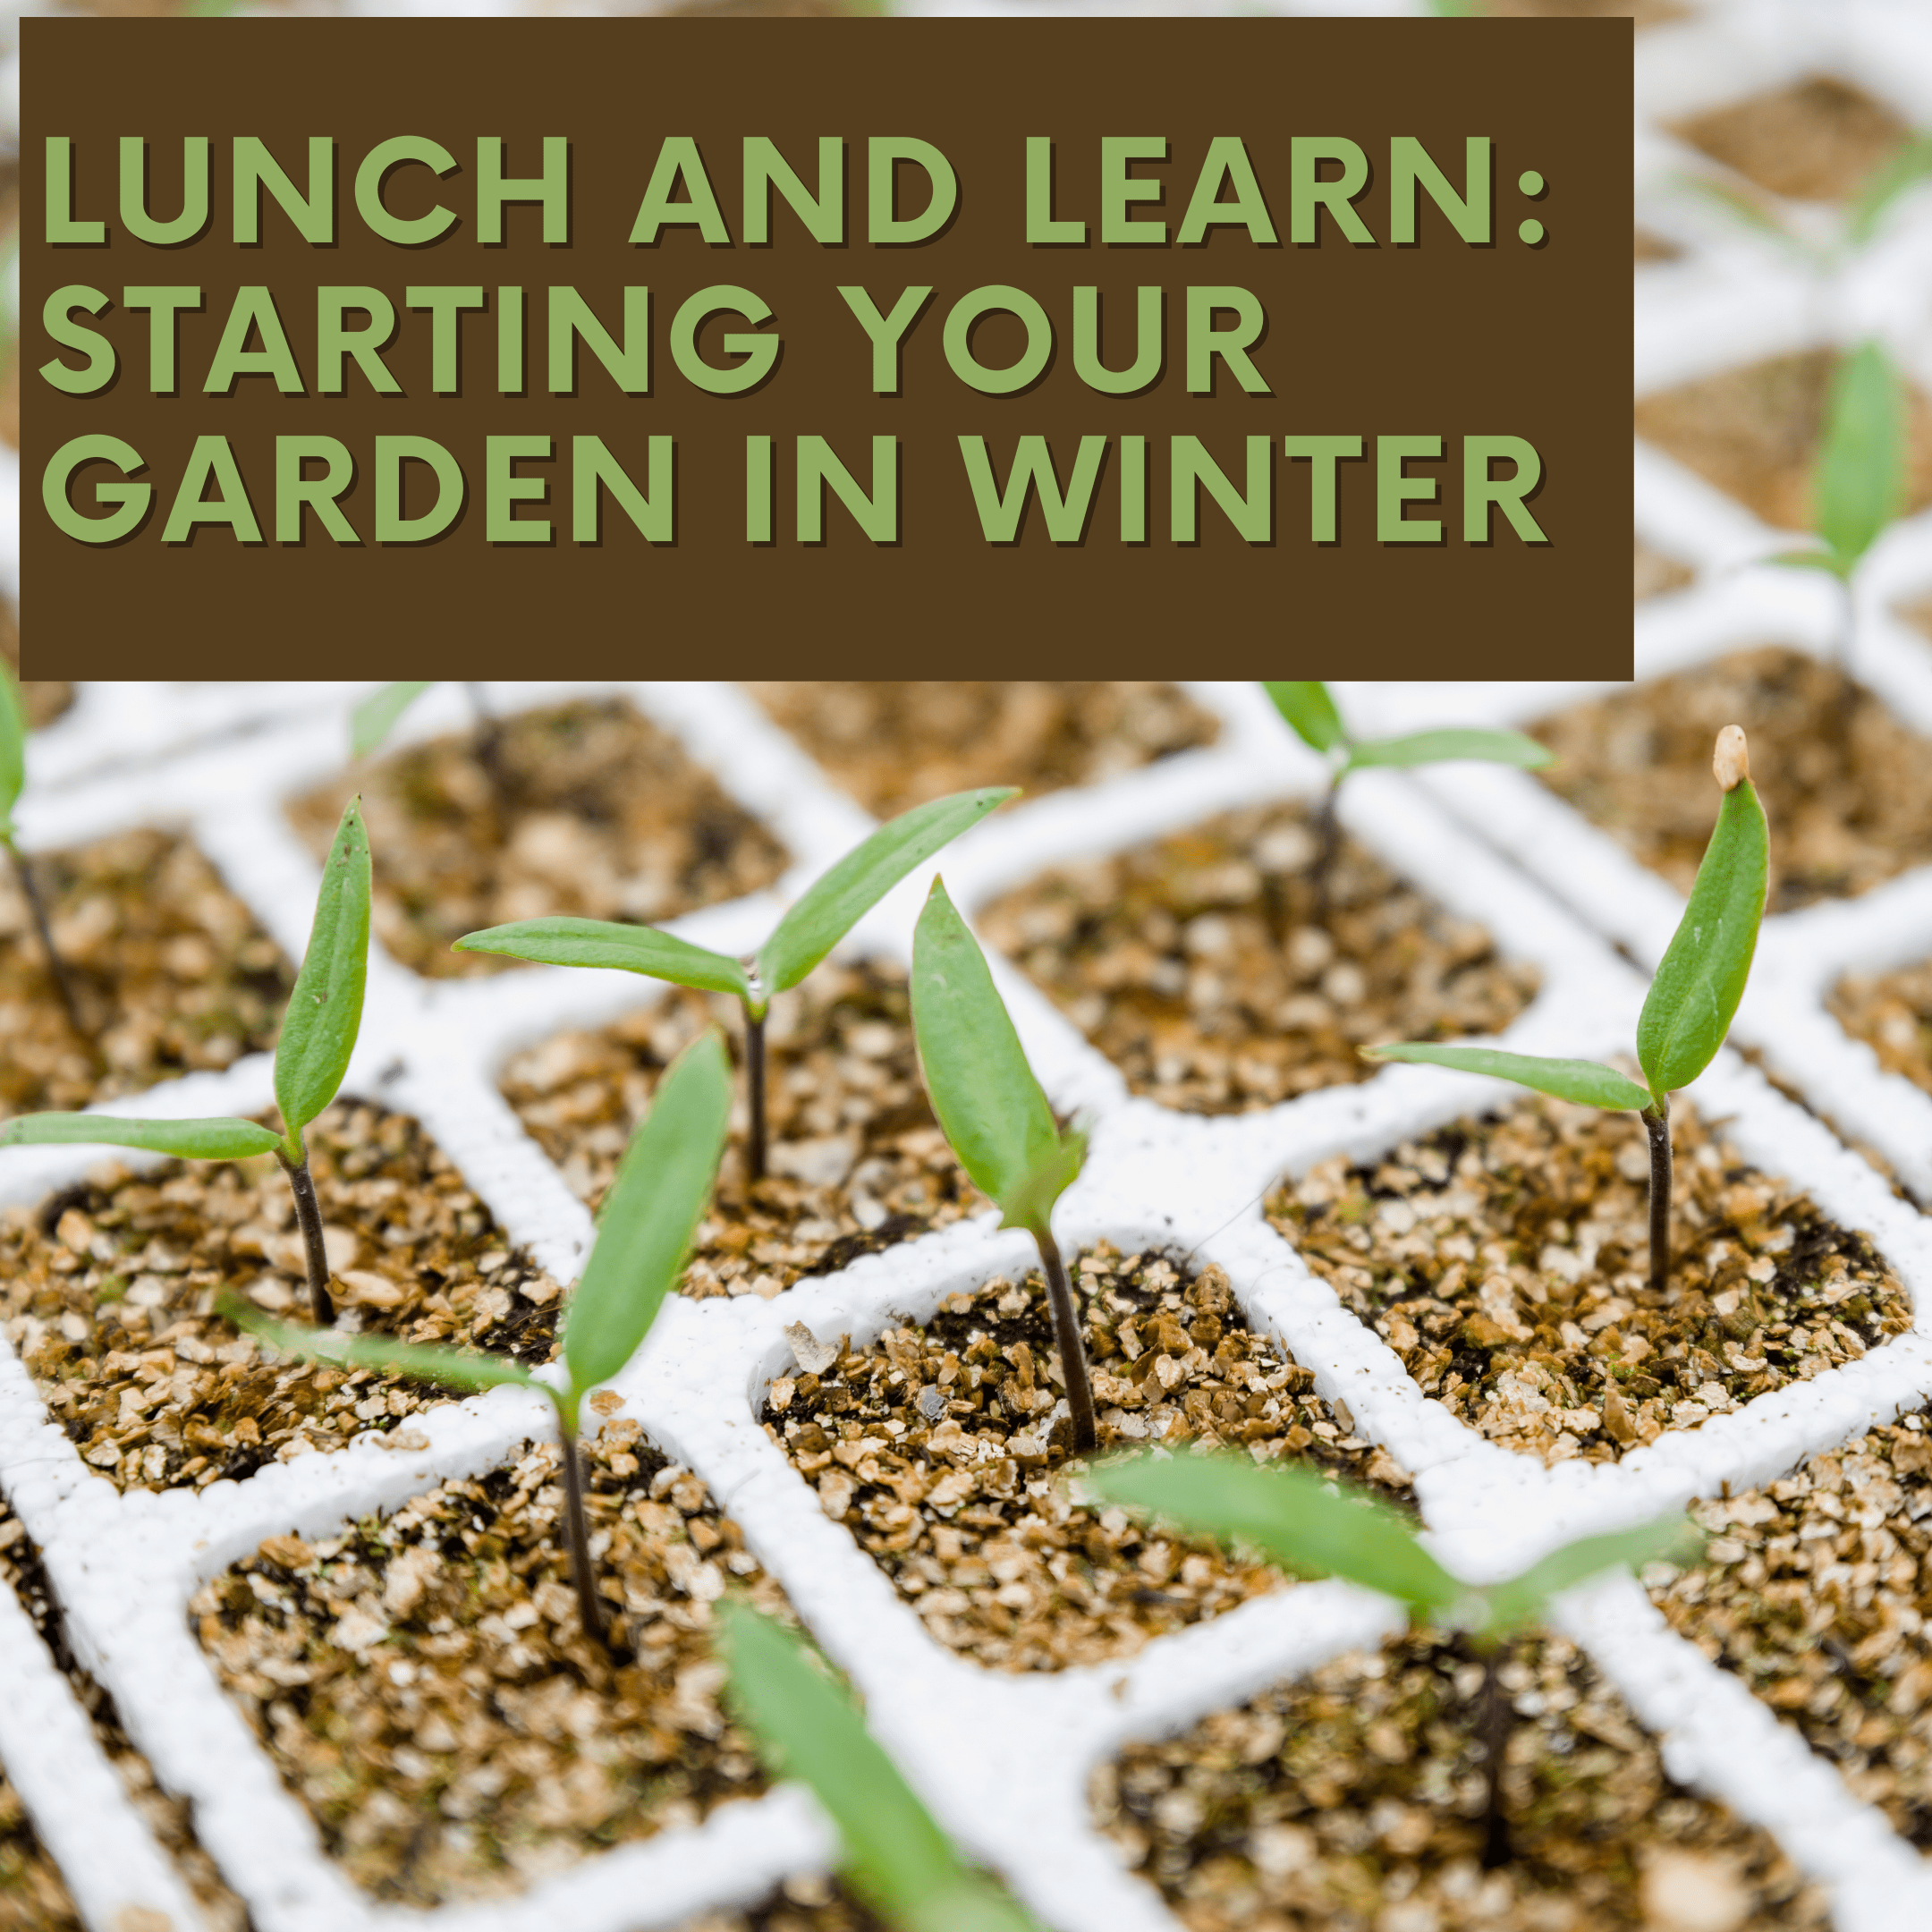 Lunch and Learn: Starting your Garden in Winter